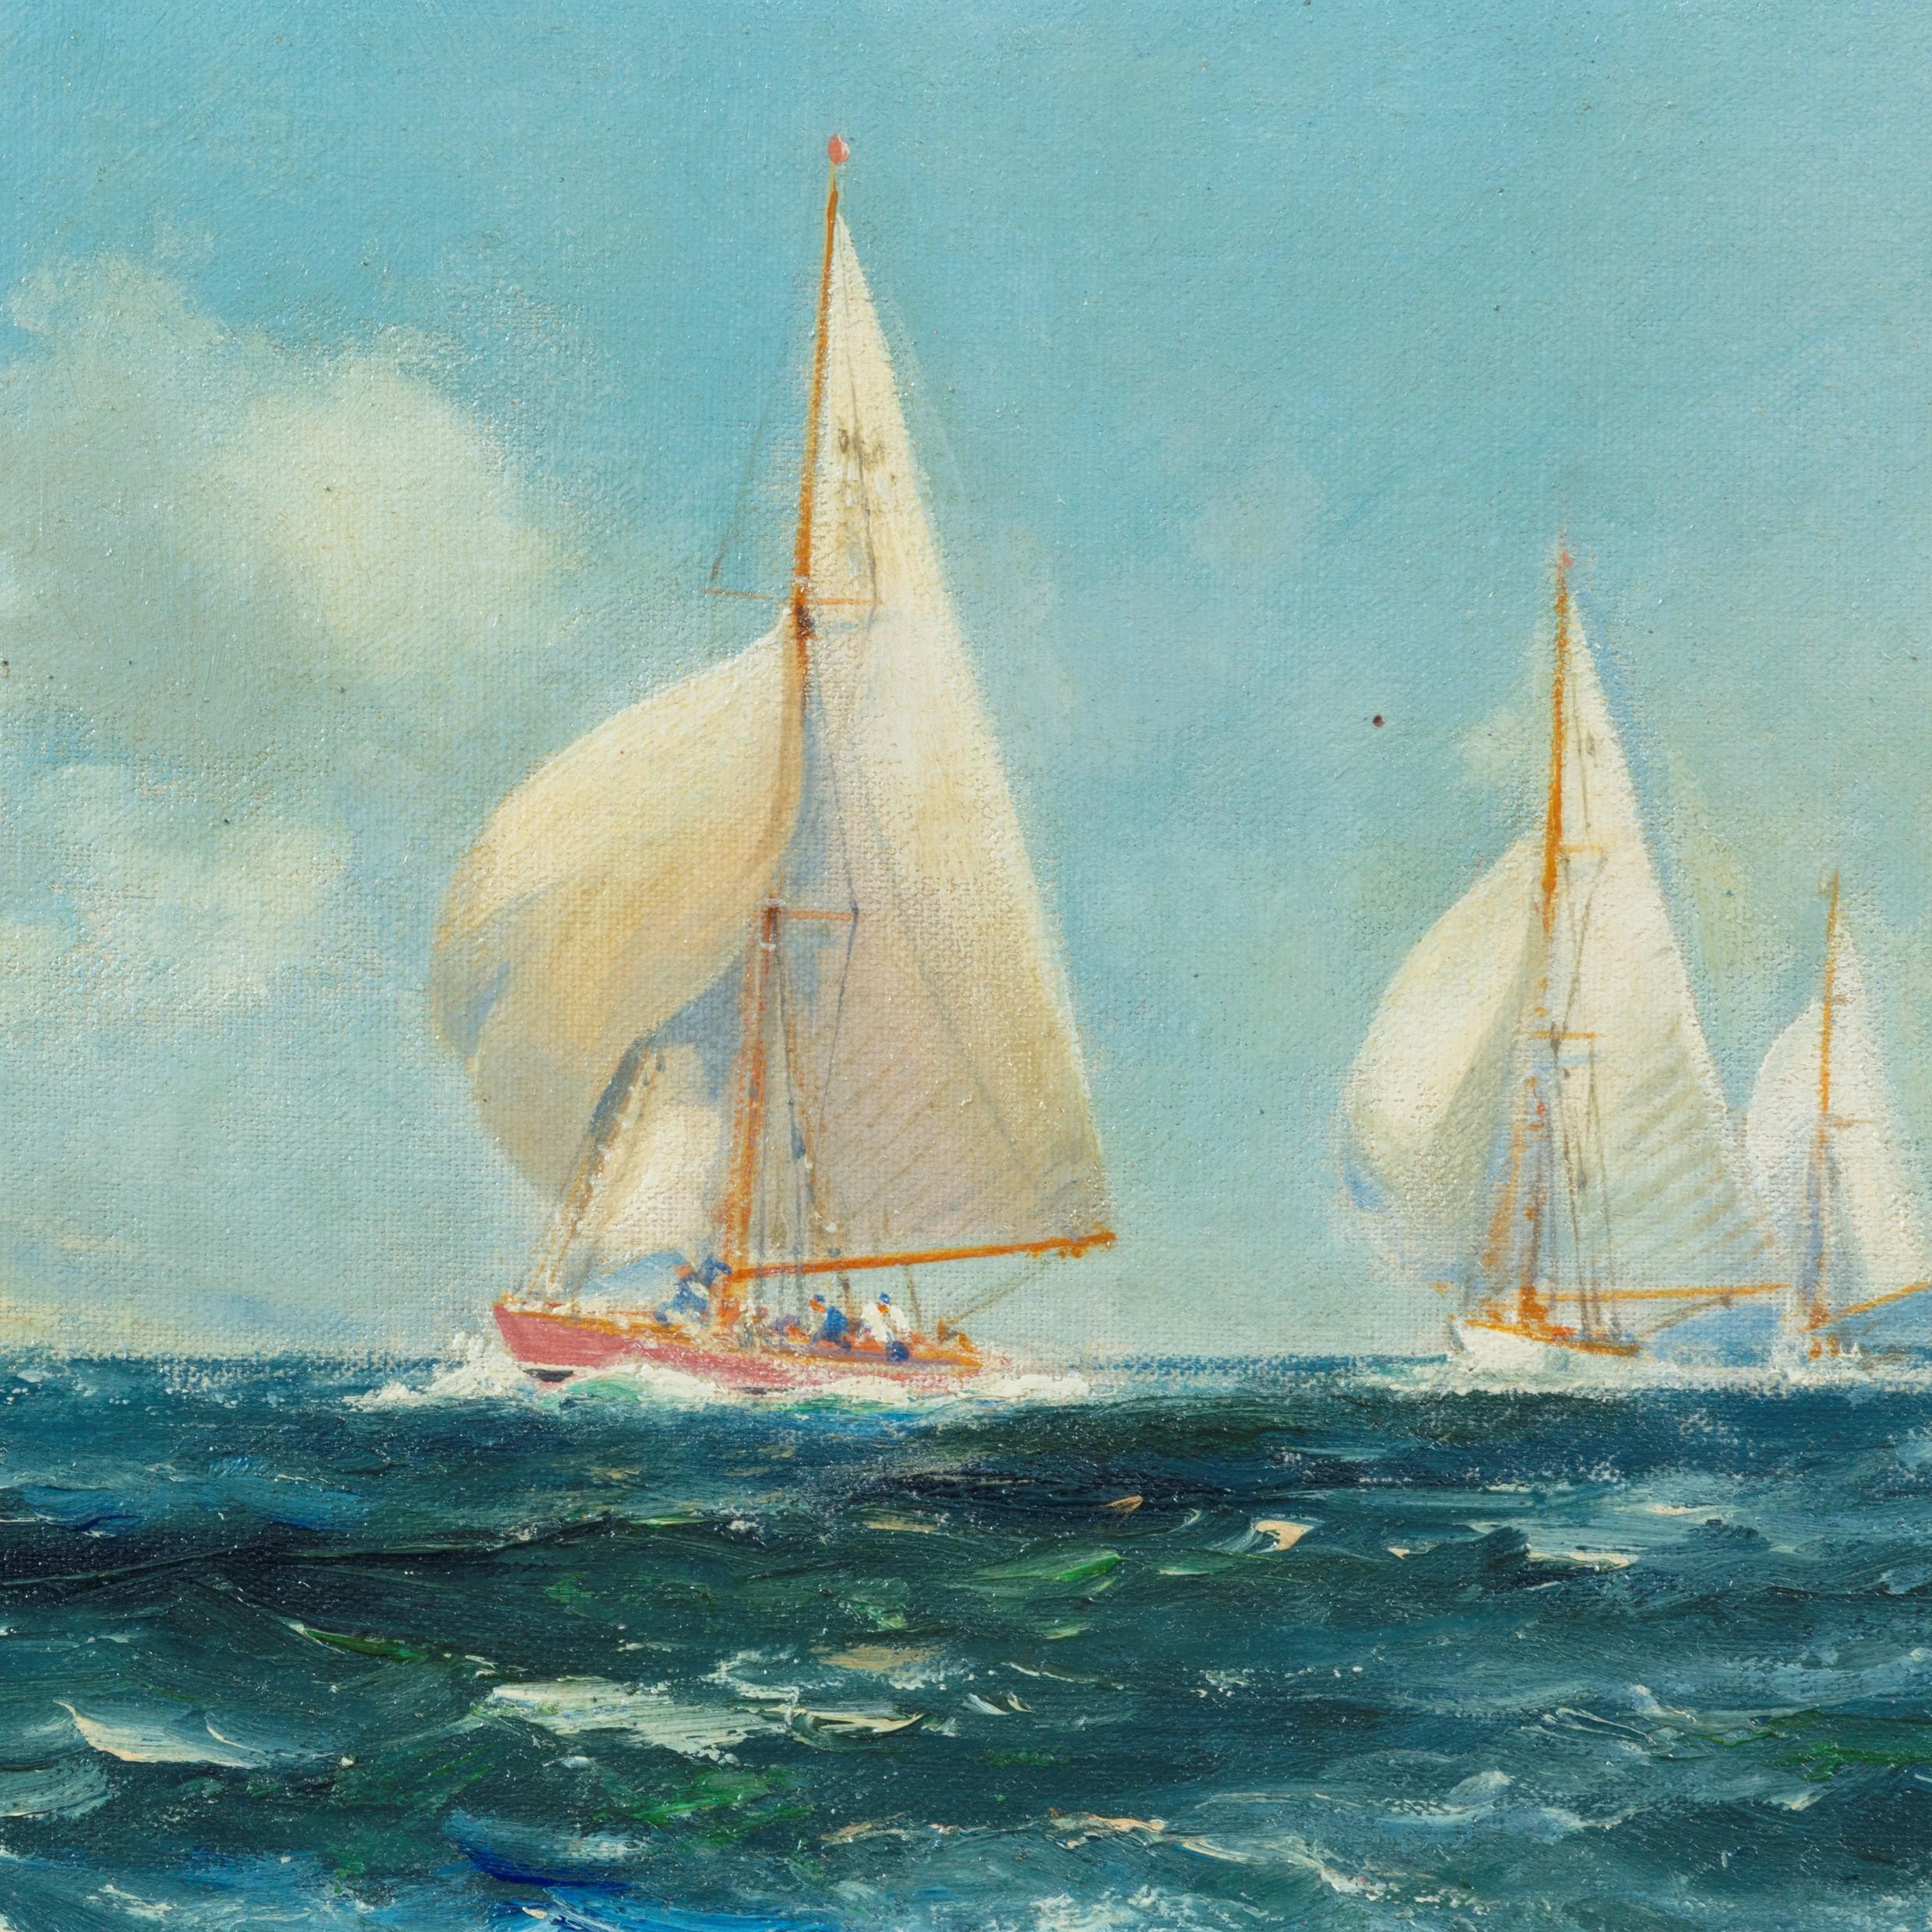 British Pair of Oil Paintings of Clyde One Design Yachts Racing by Frank Henry Mason